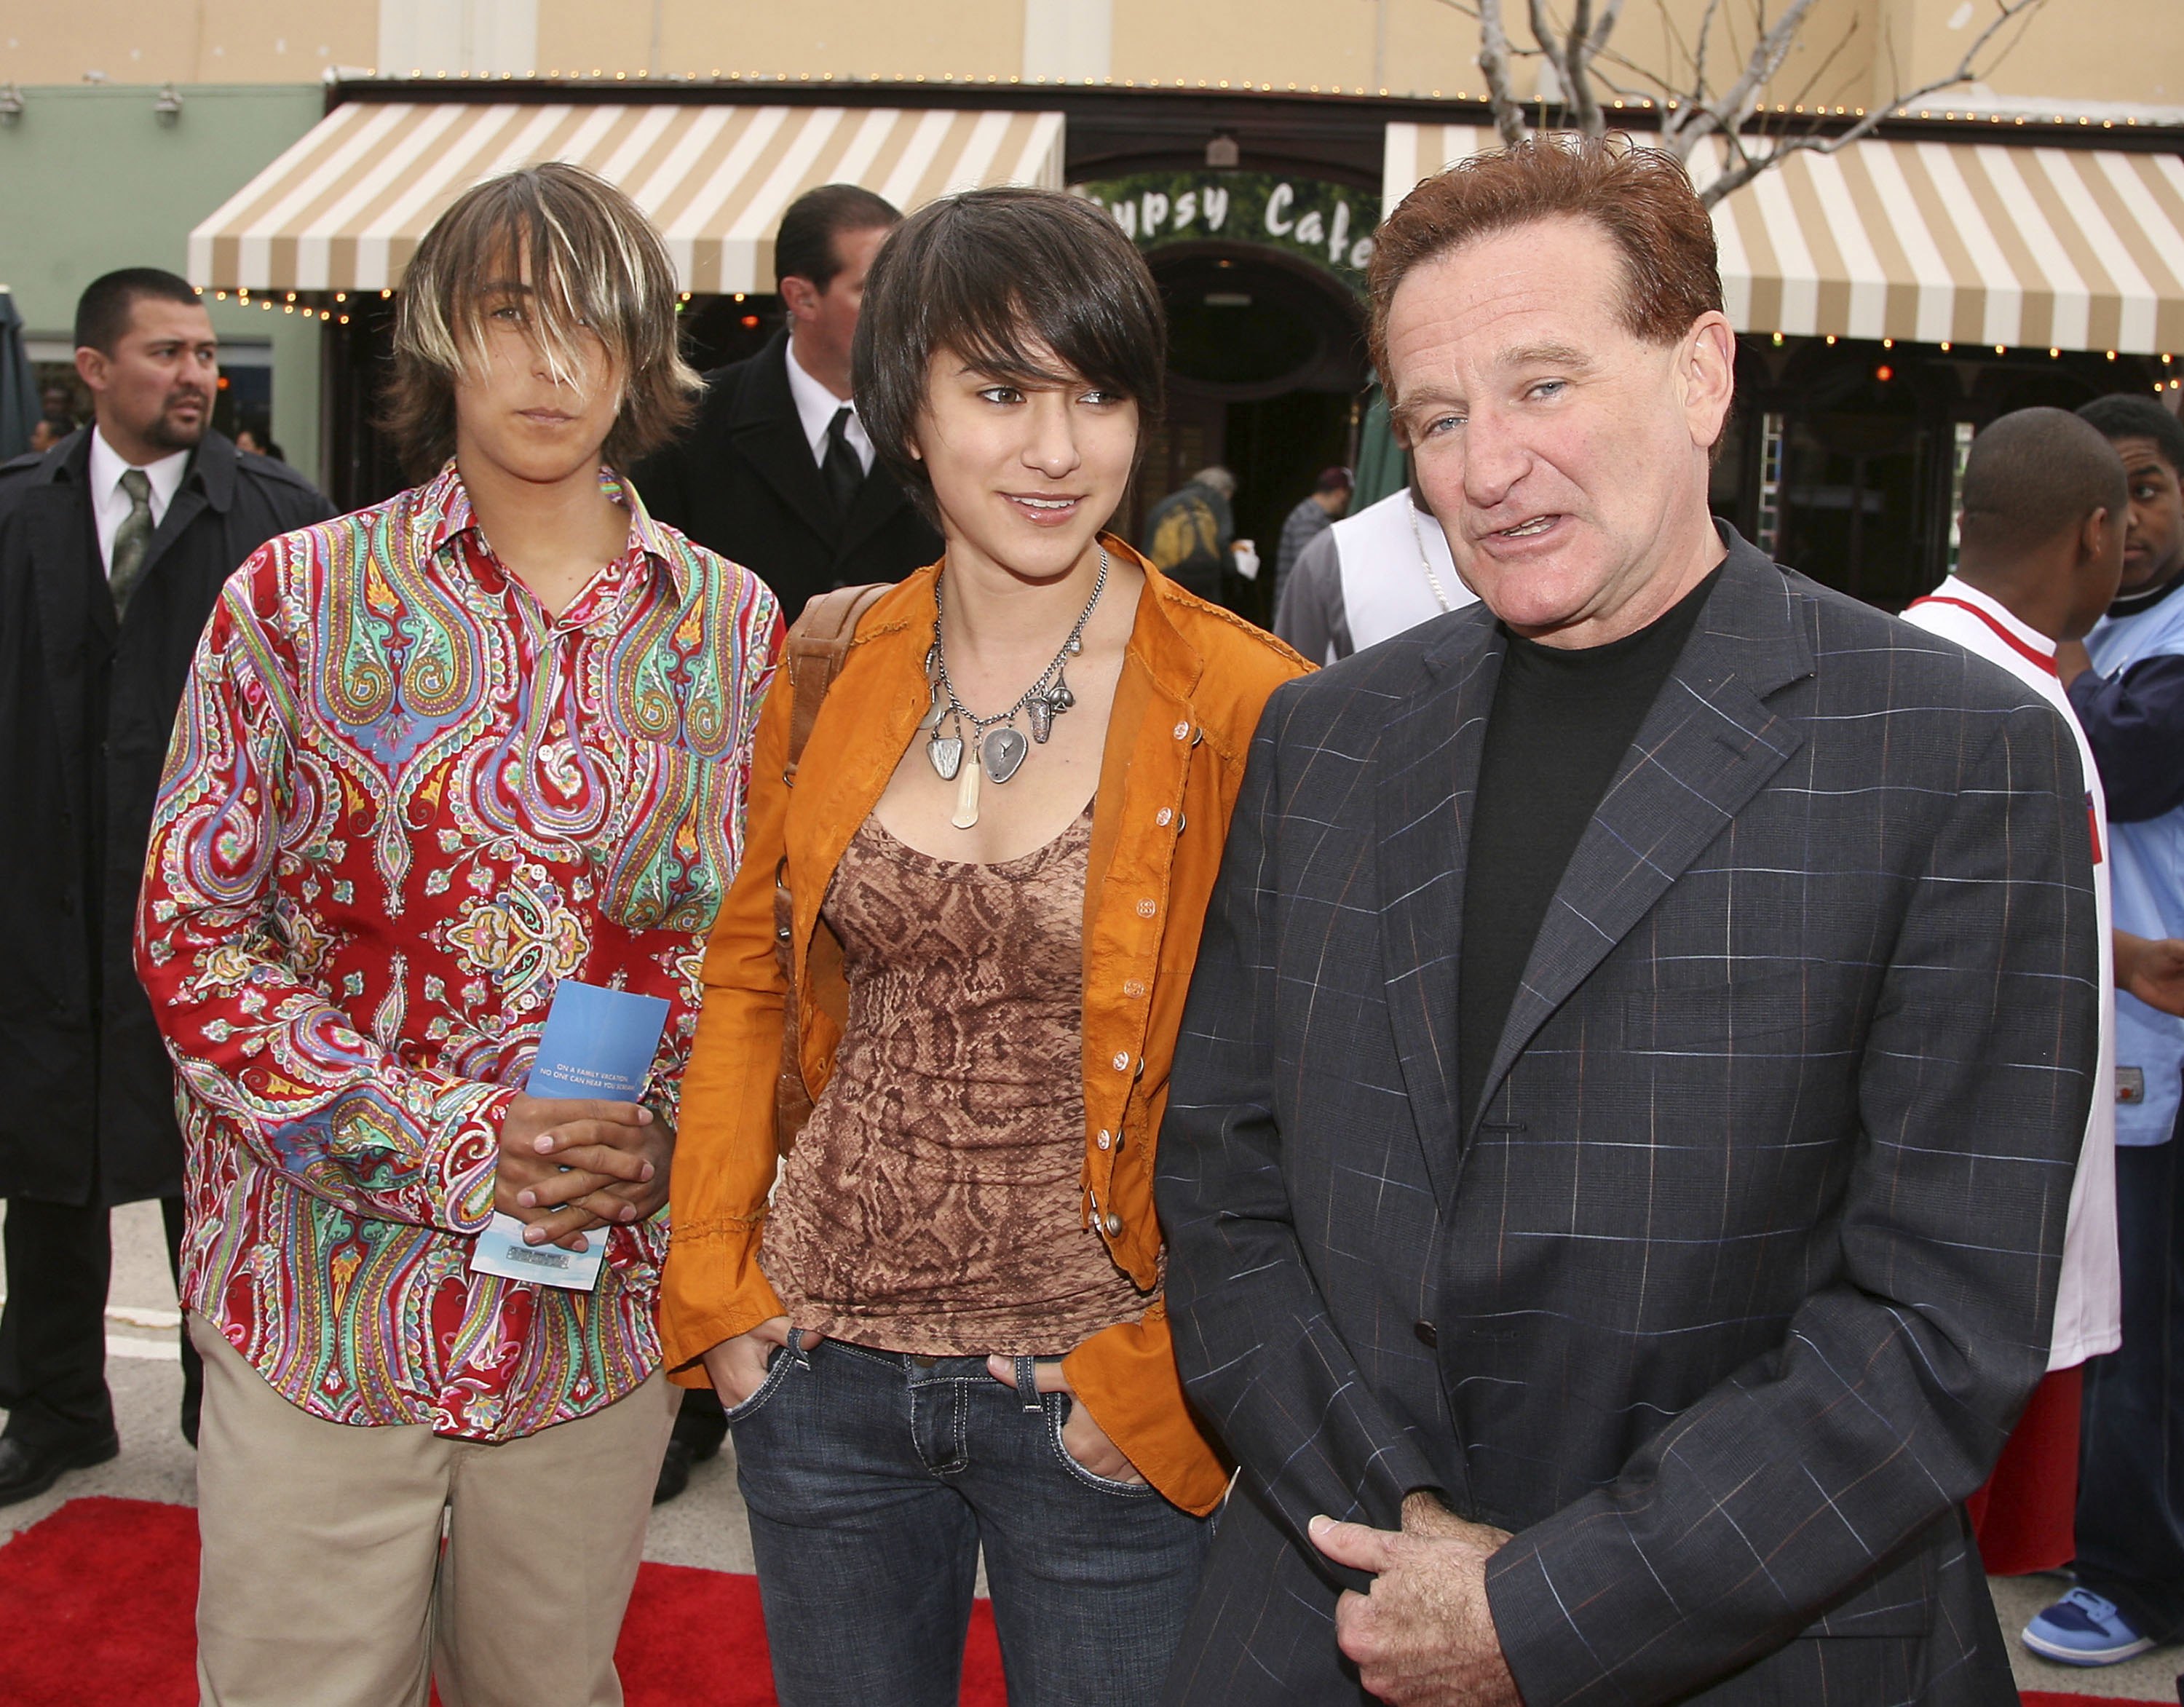 Cody Williams, Zelda Williams, and Robin Williams at the premiere of Columbia Picture's "RV" in Los Angeles, California on April 23, 2006 | Source: Getty Images